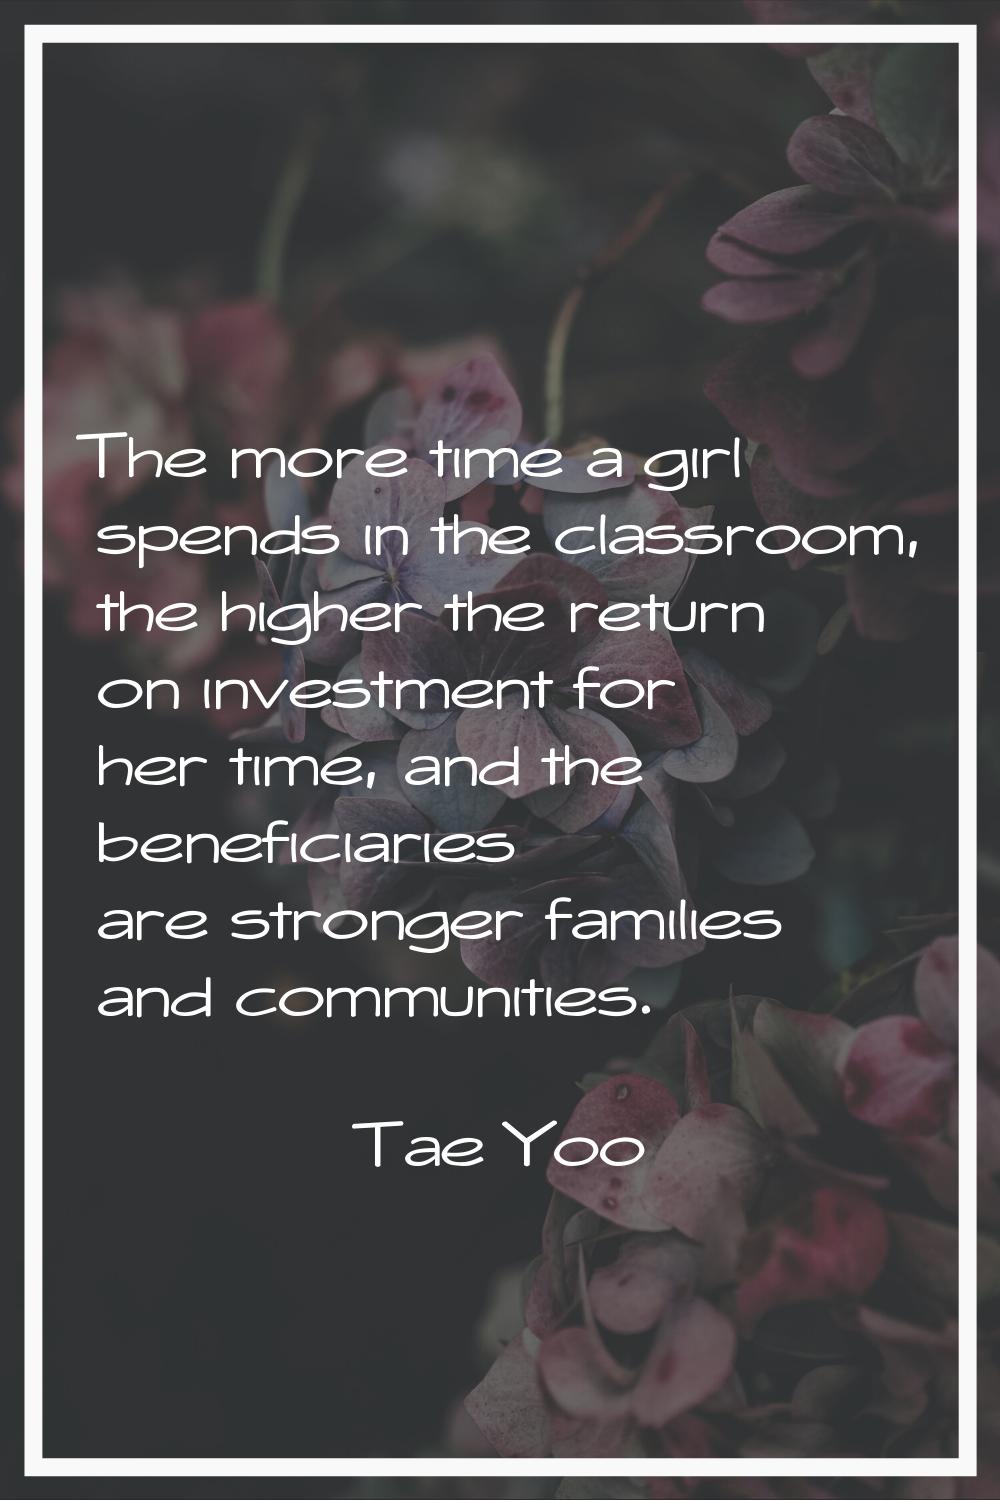 The more time a girl spends in the classroom, the higher the return on investment for her time, and